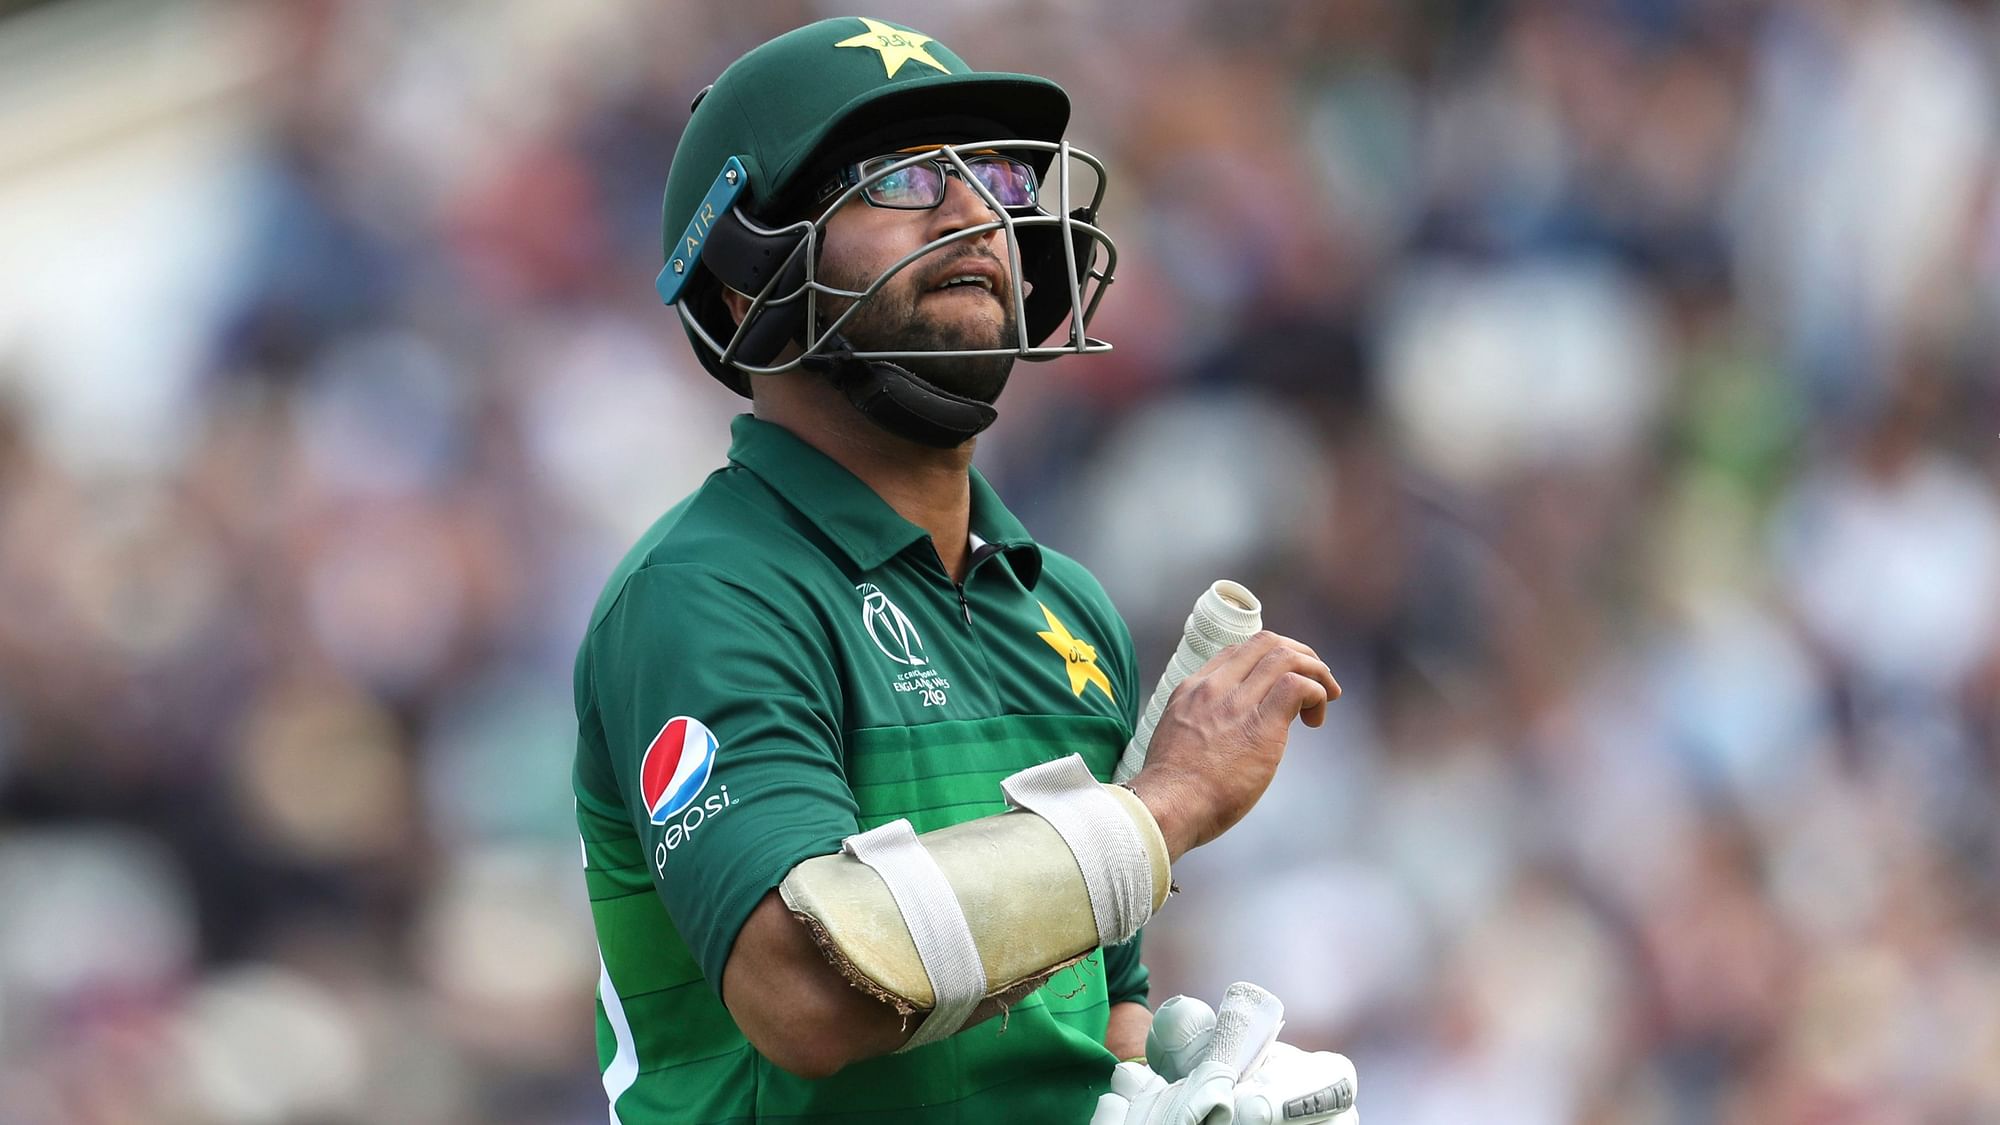 Pakistan’s Imam-ul-Haq after being dismissed during the Cricket World Cup match between England and Pakistan at Trent Bridge in Nottingham, Monday, 3 June.